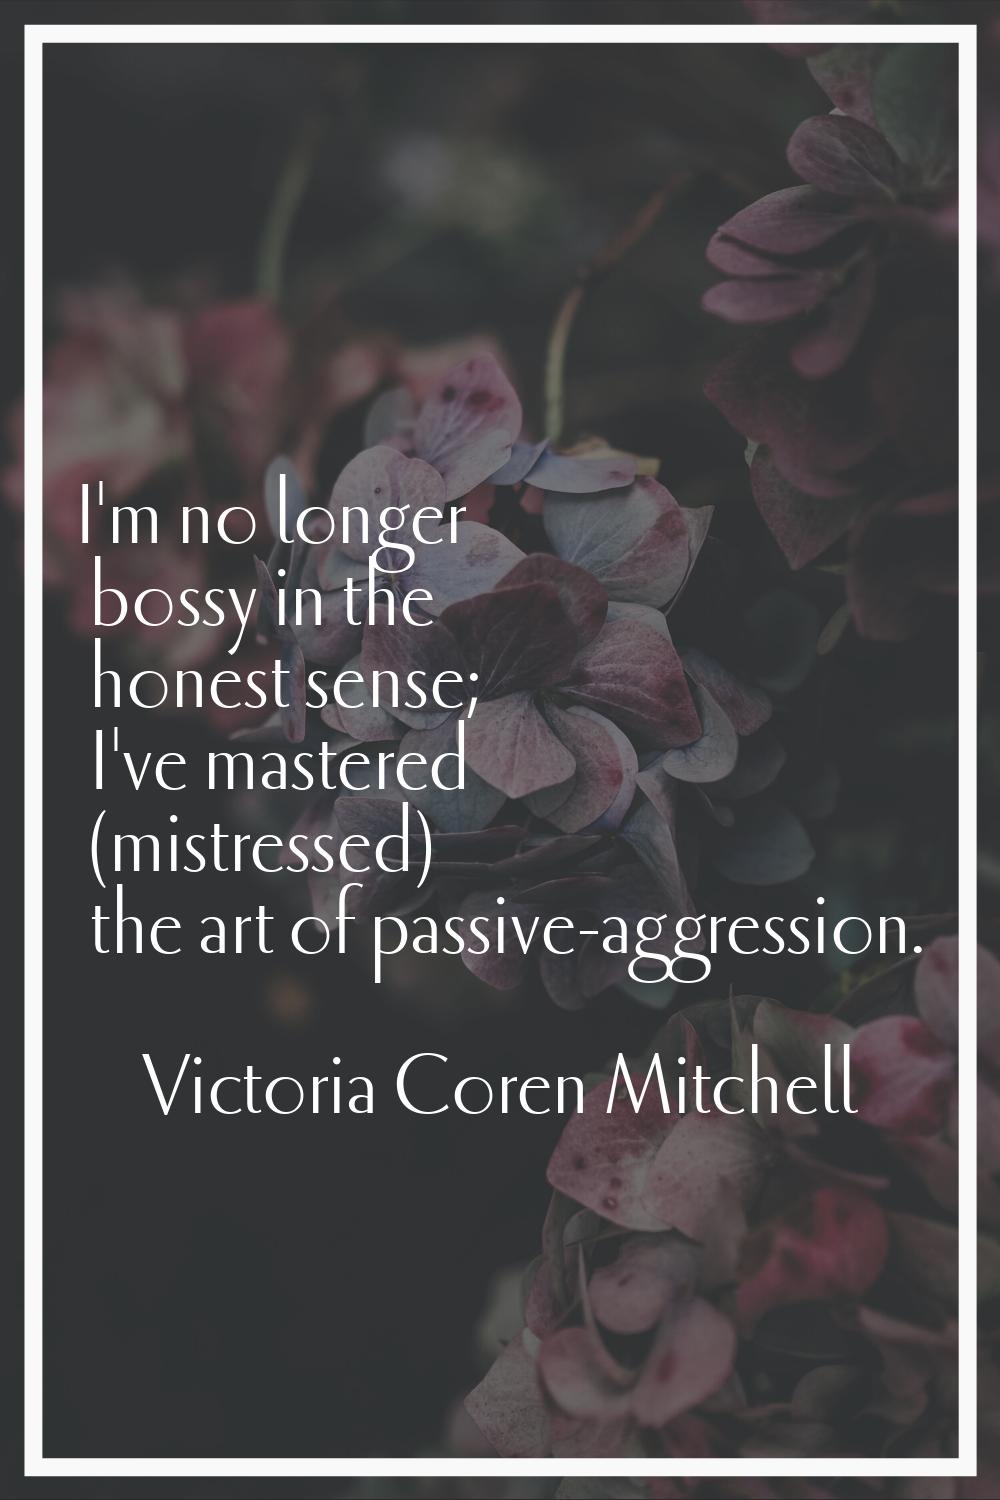 I'm no longer bossy in the honest sense; I've mastered (mistressed) the art of passive-aggression.